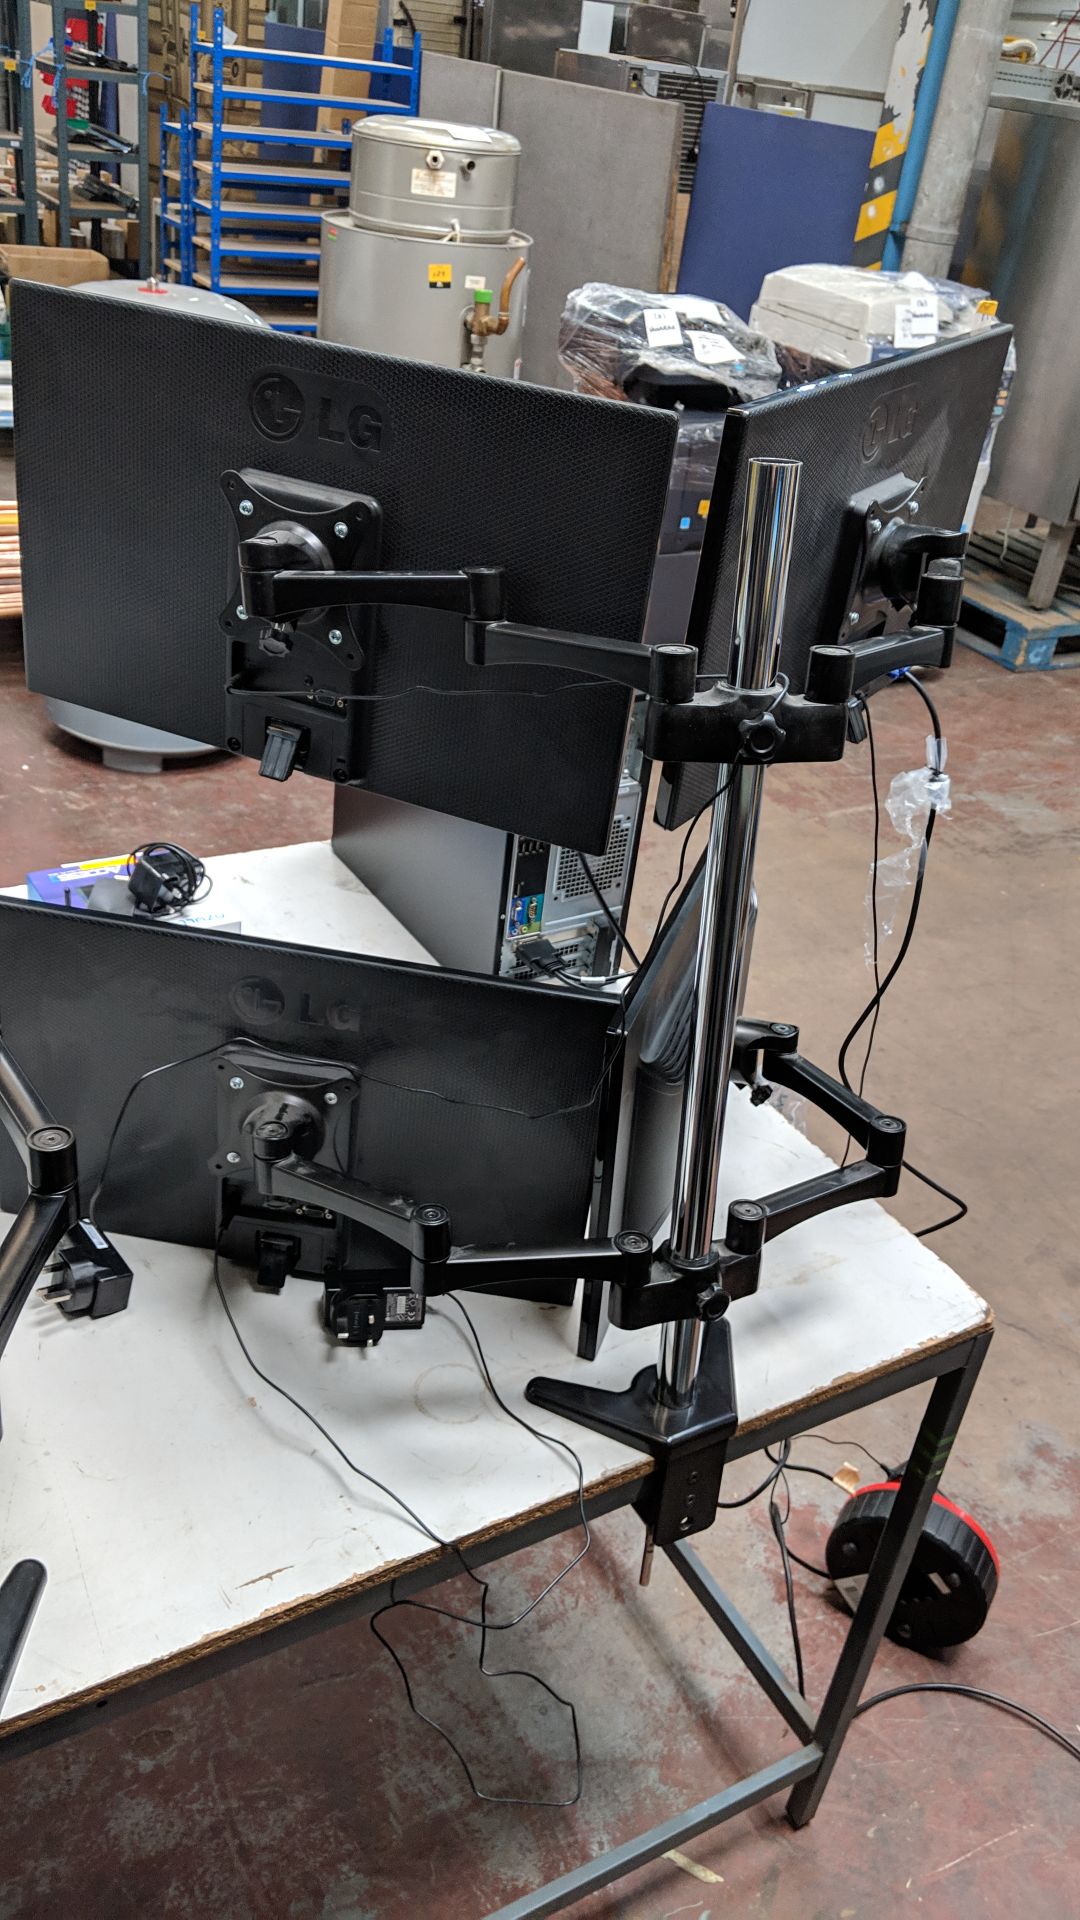 Quad monitor system comprising desk clamp/stand & 4 off assorted 22" widescreen monitors - Image 9 of 10